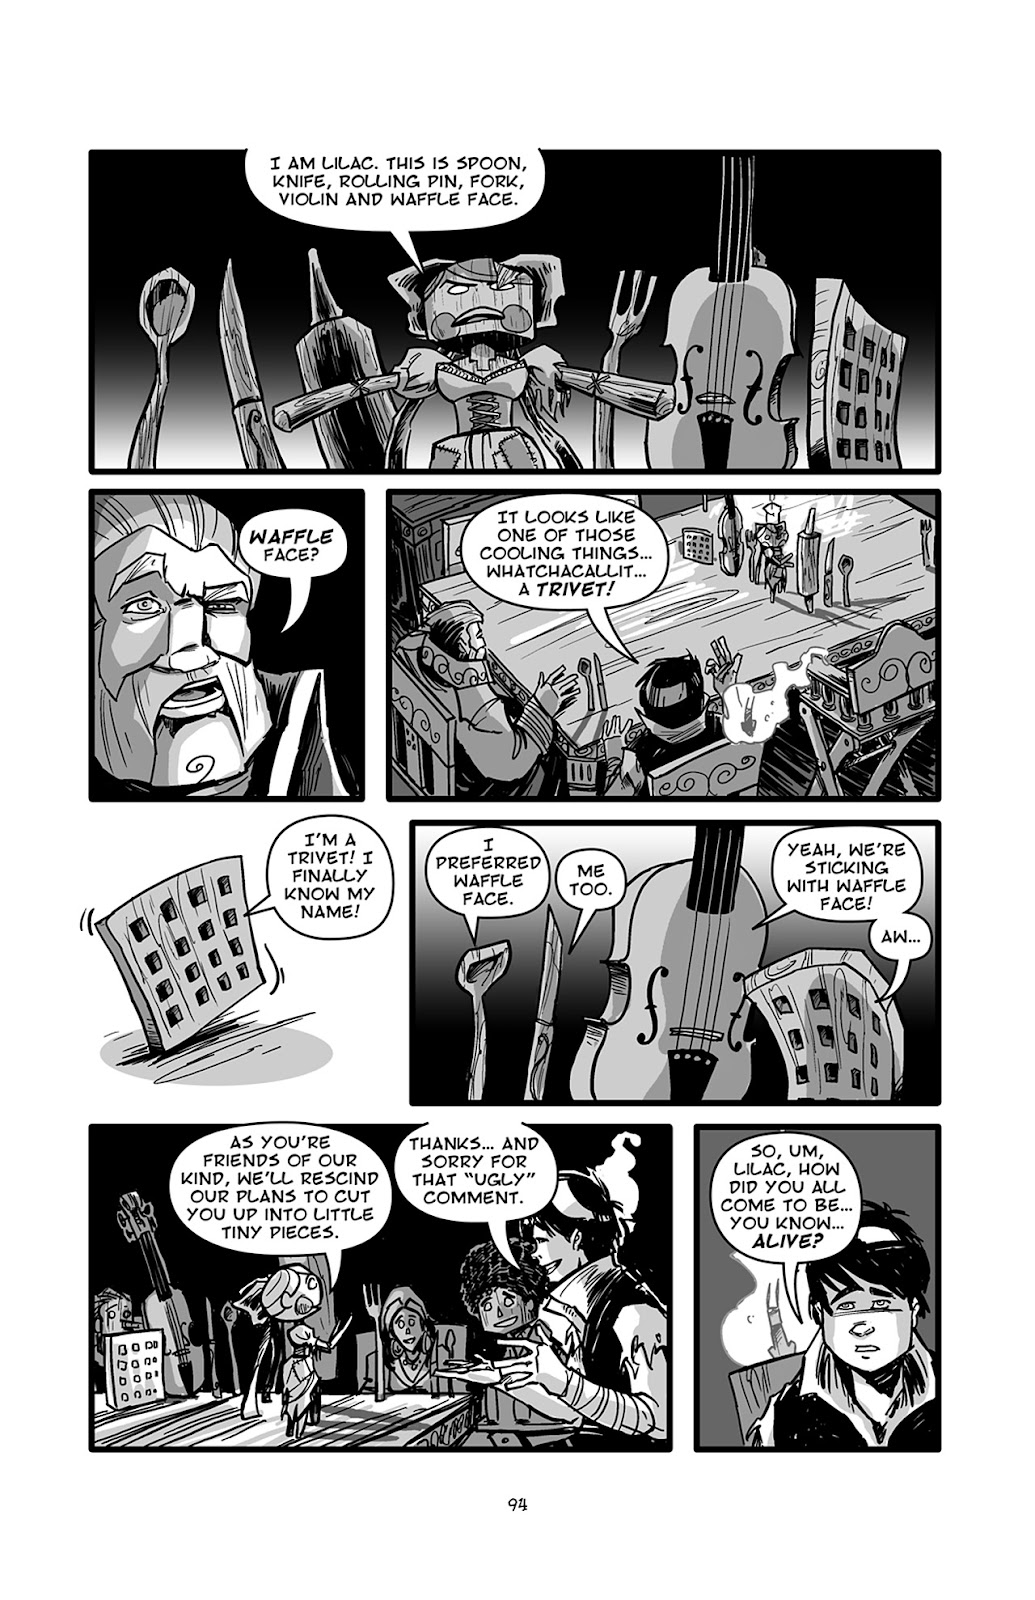 Pinocchio: Vampire Slayer - Of Wood and Blood issue 4 - Page 21